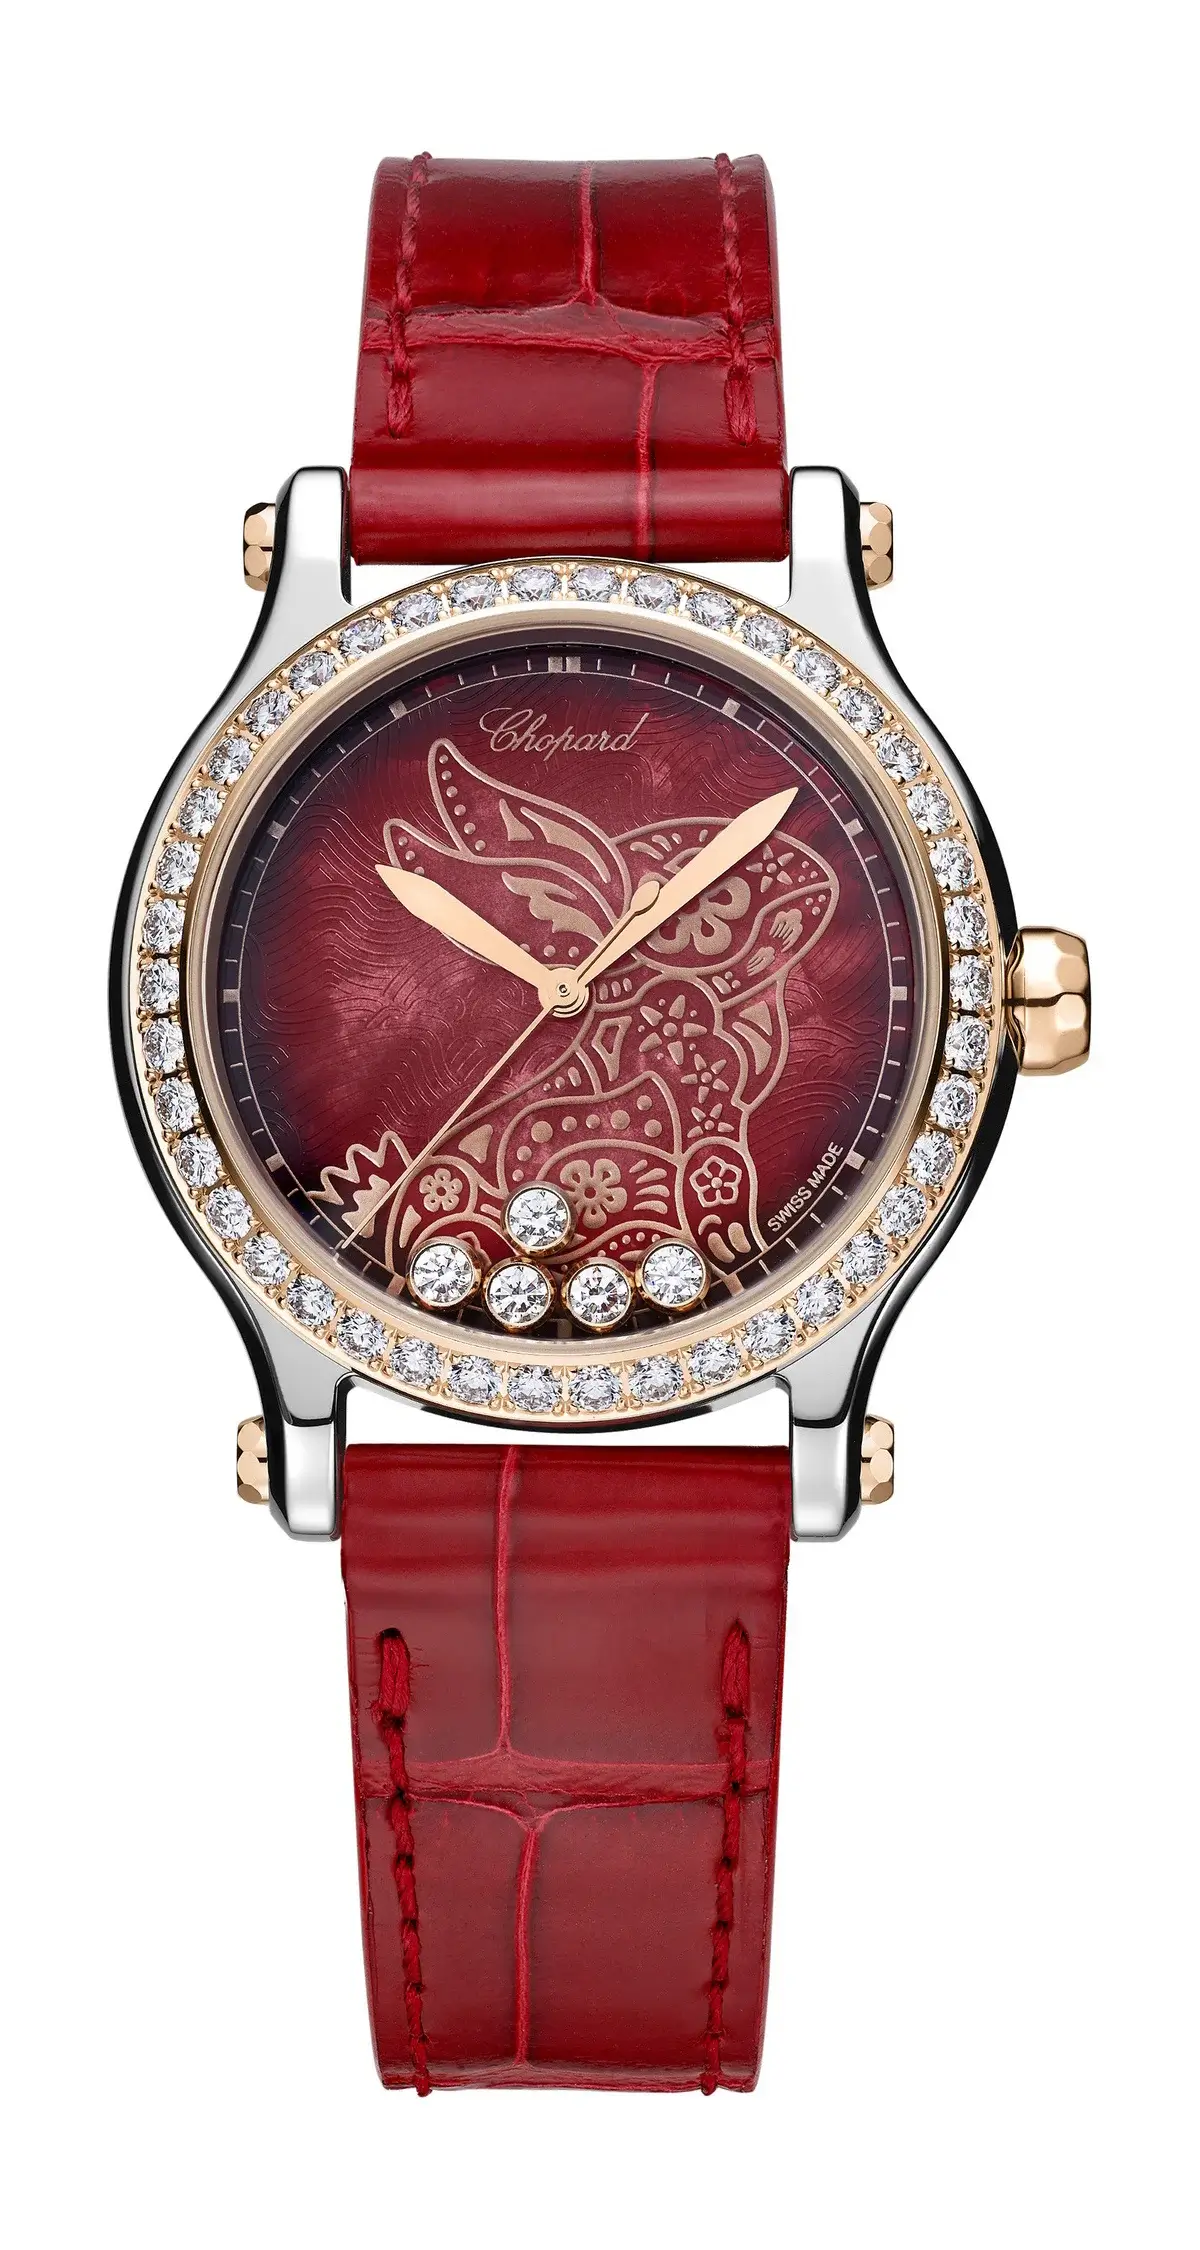 A Chopard watch with a red leather strap, diamond-studded bezel, and a detailed butterfly design on a maroon background.